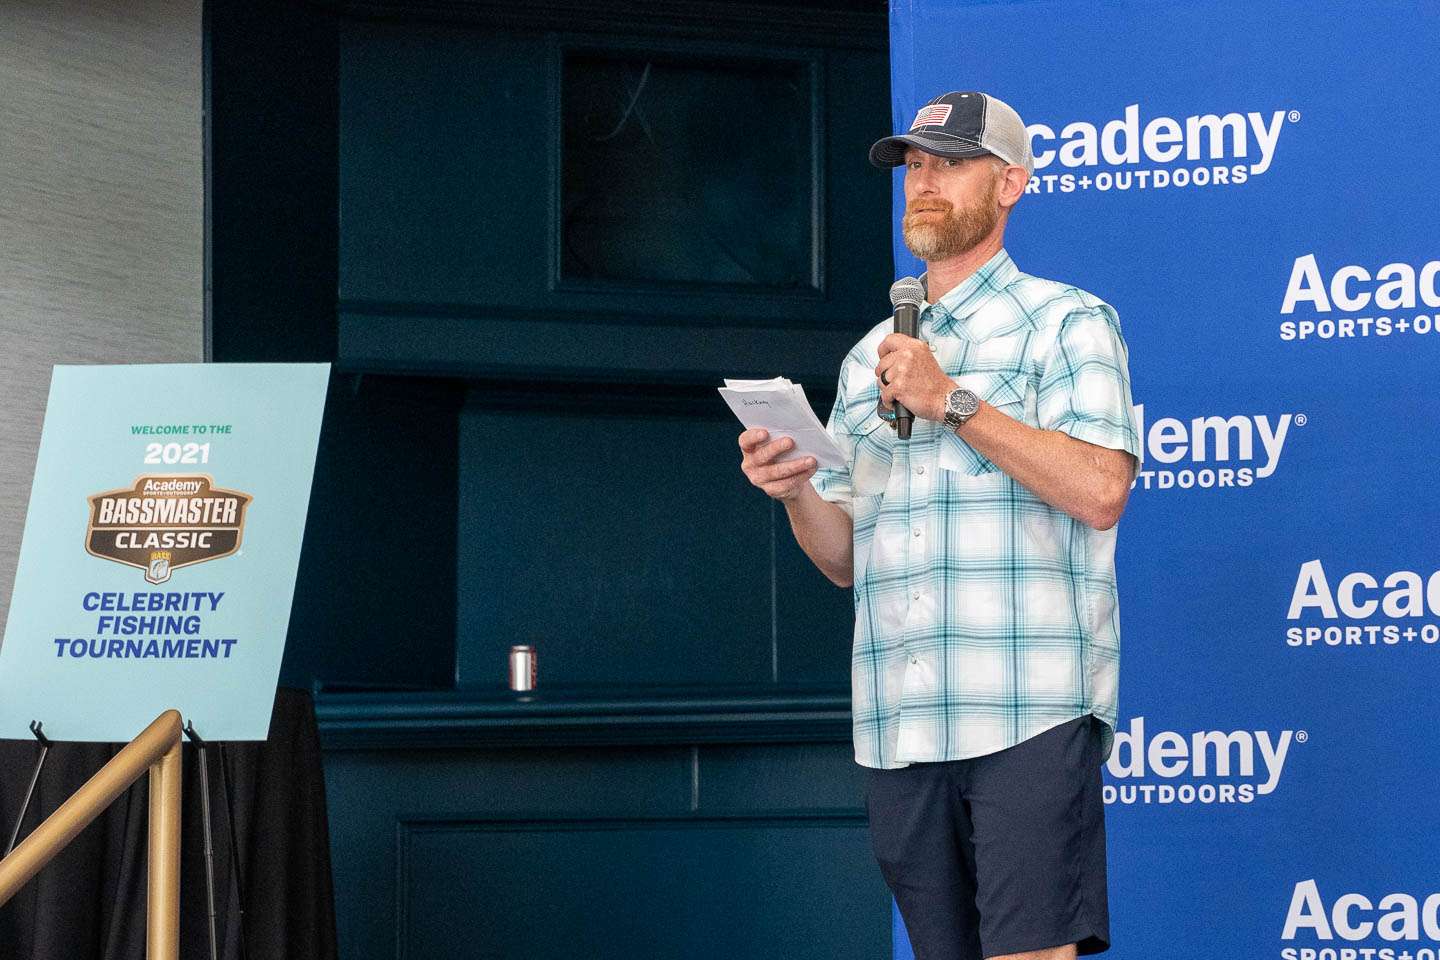 Kicking off the week at the Academy Sports + Outdoors Bassmaster Classic presented by Huk was a special event pairing sports celebrities, pro fishermen and media members together. Marty Smith, from ESPN emceed the festivities. 